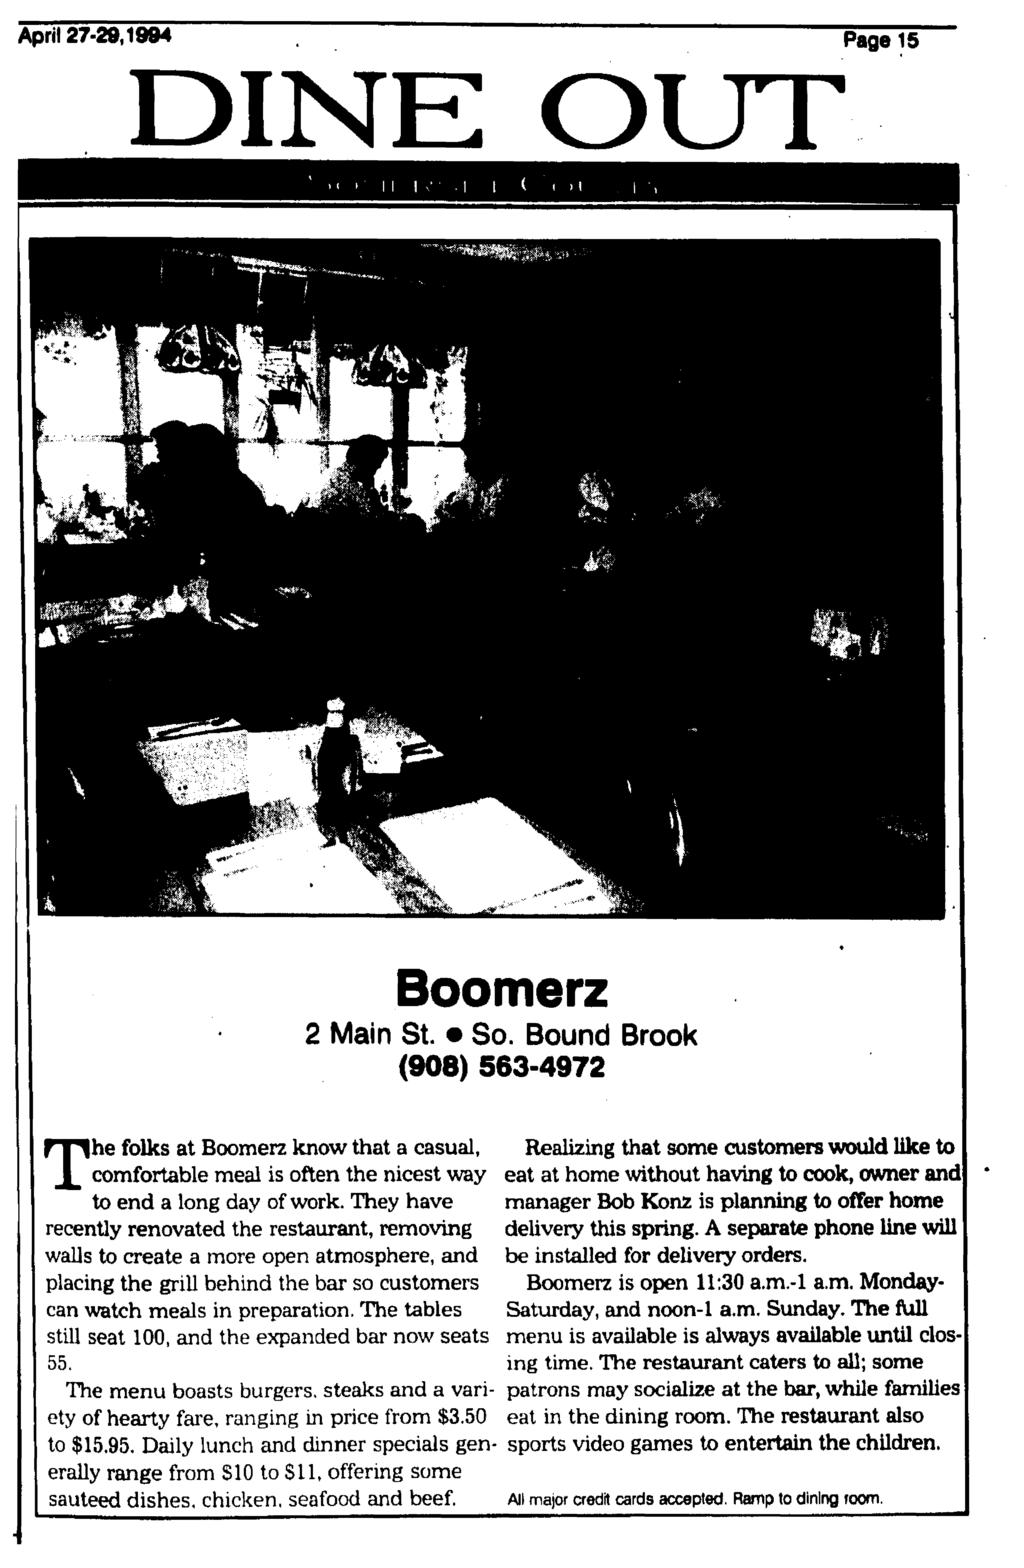 April 27-29,1984 Page 15 DINE OUT The folks at Boomerz know that a casual, comfortable meal is often the nicest way to end a long day of work.